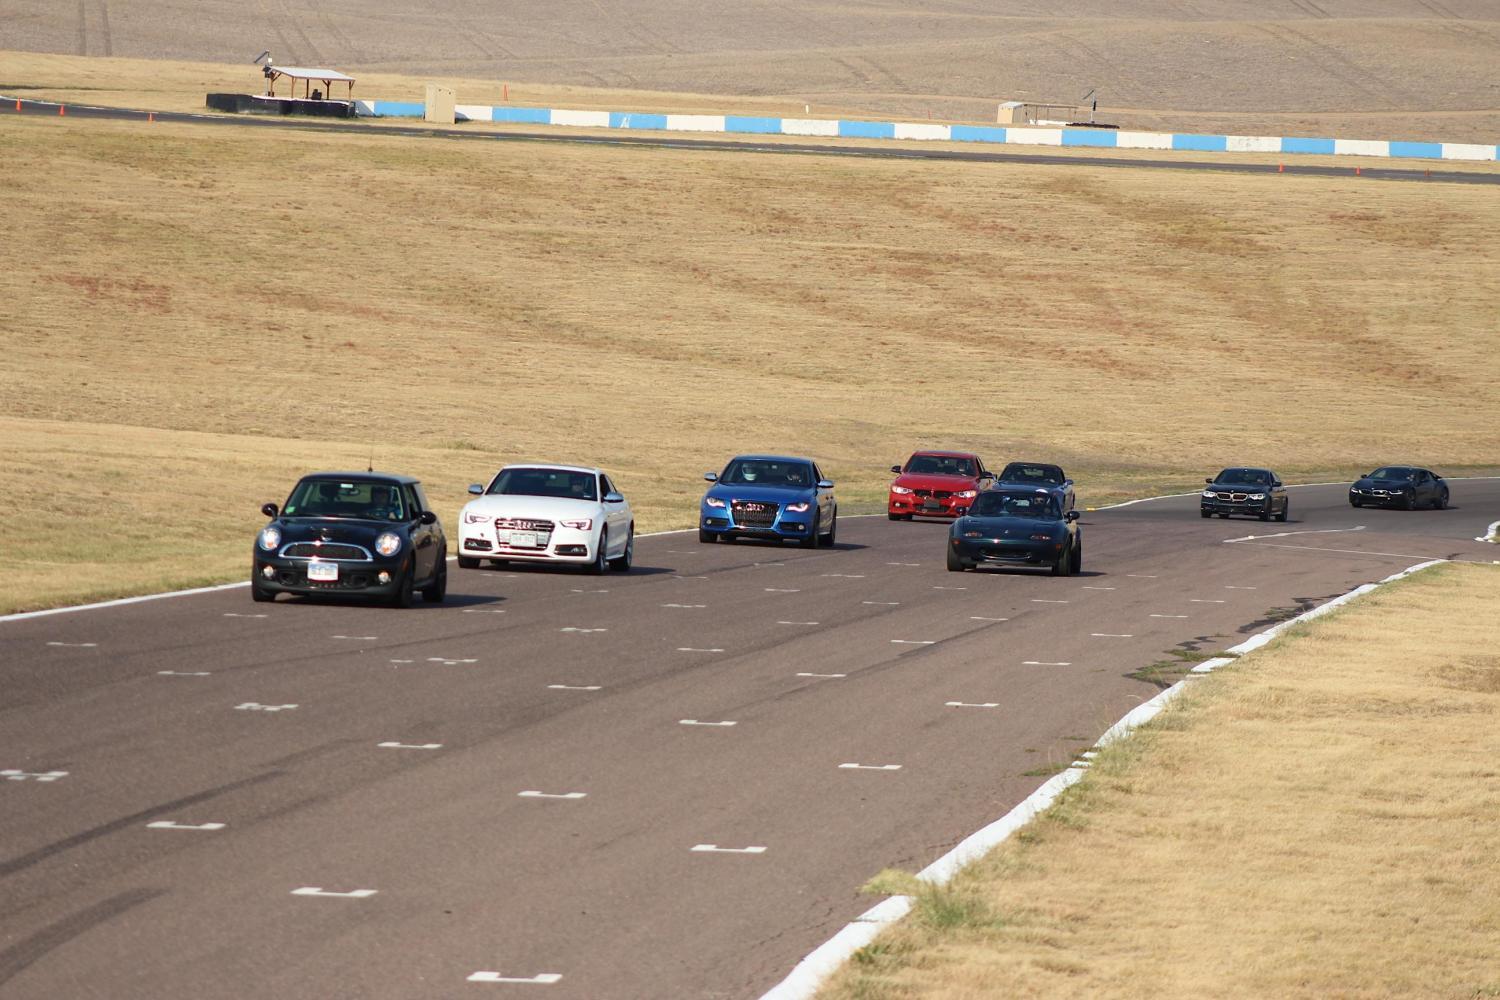 October 2022 Emich VW/Chevy Track Day Event
Sun Oct 16, 8:00 AM - Sun Oct 16, 5:00 PM